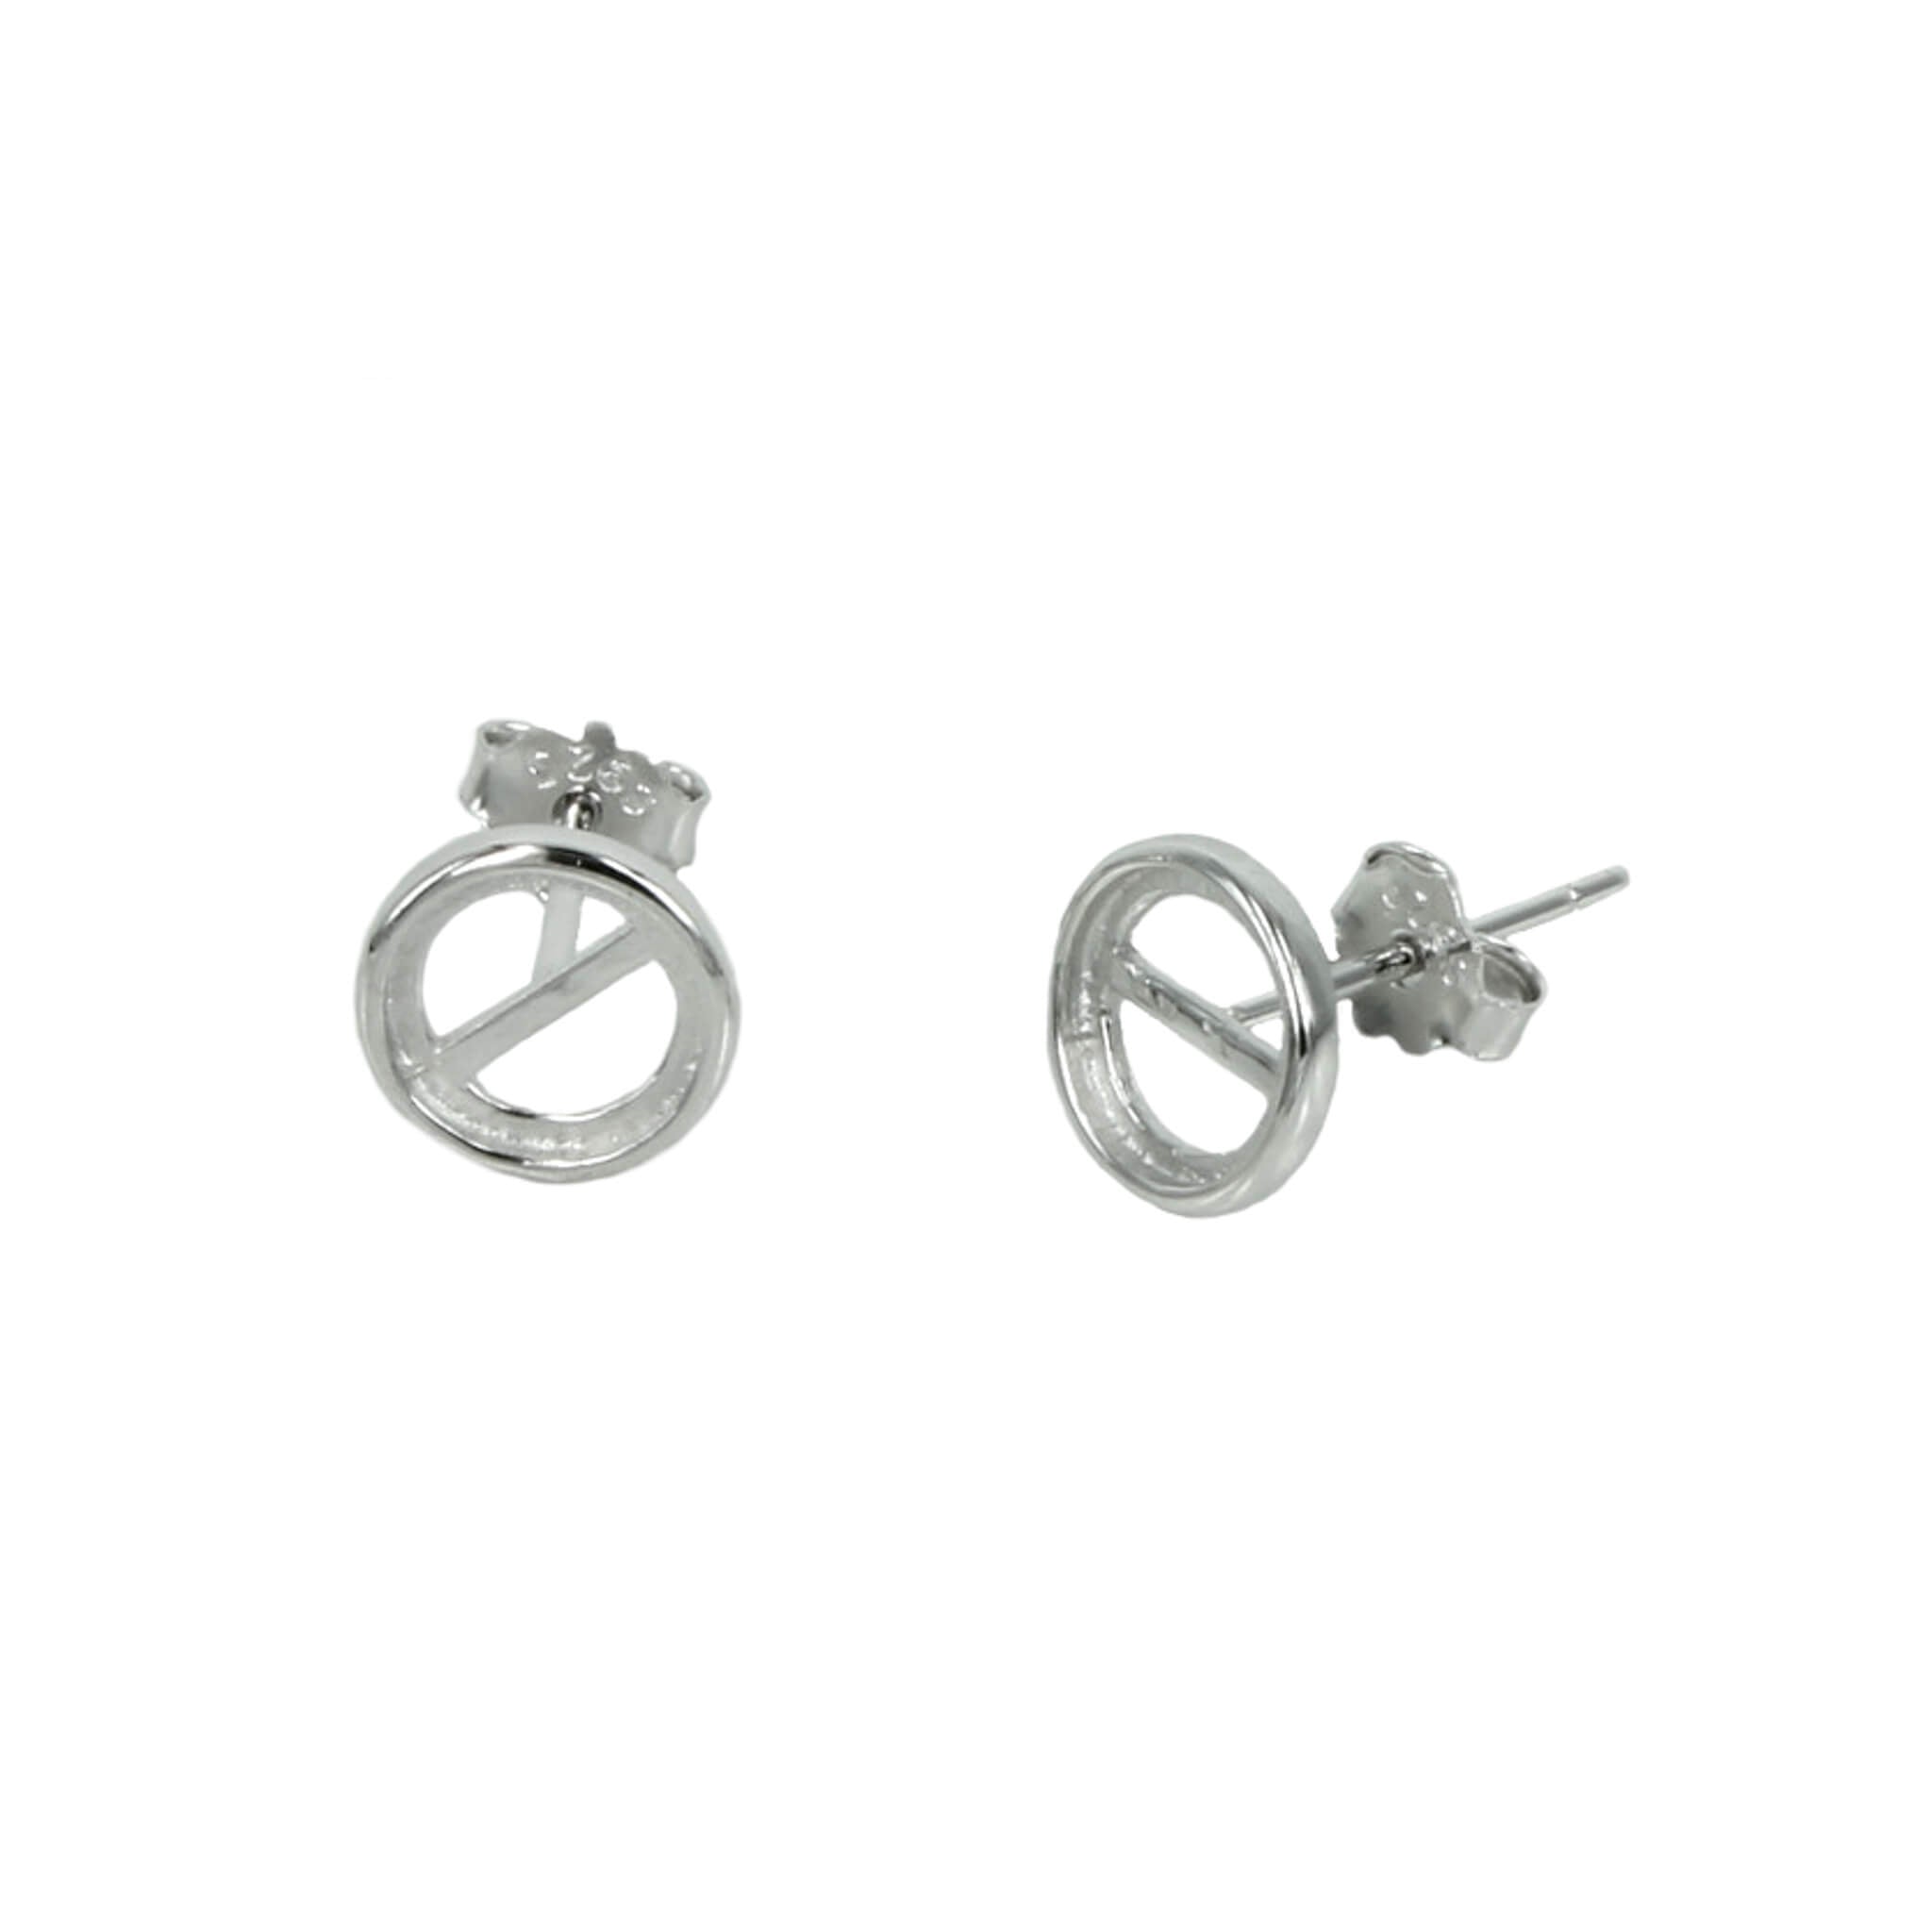 Round Ear Studs in Sterling Silver 6mm